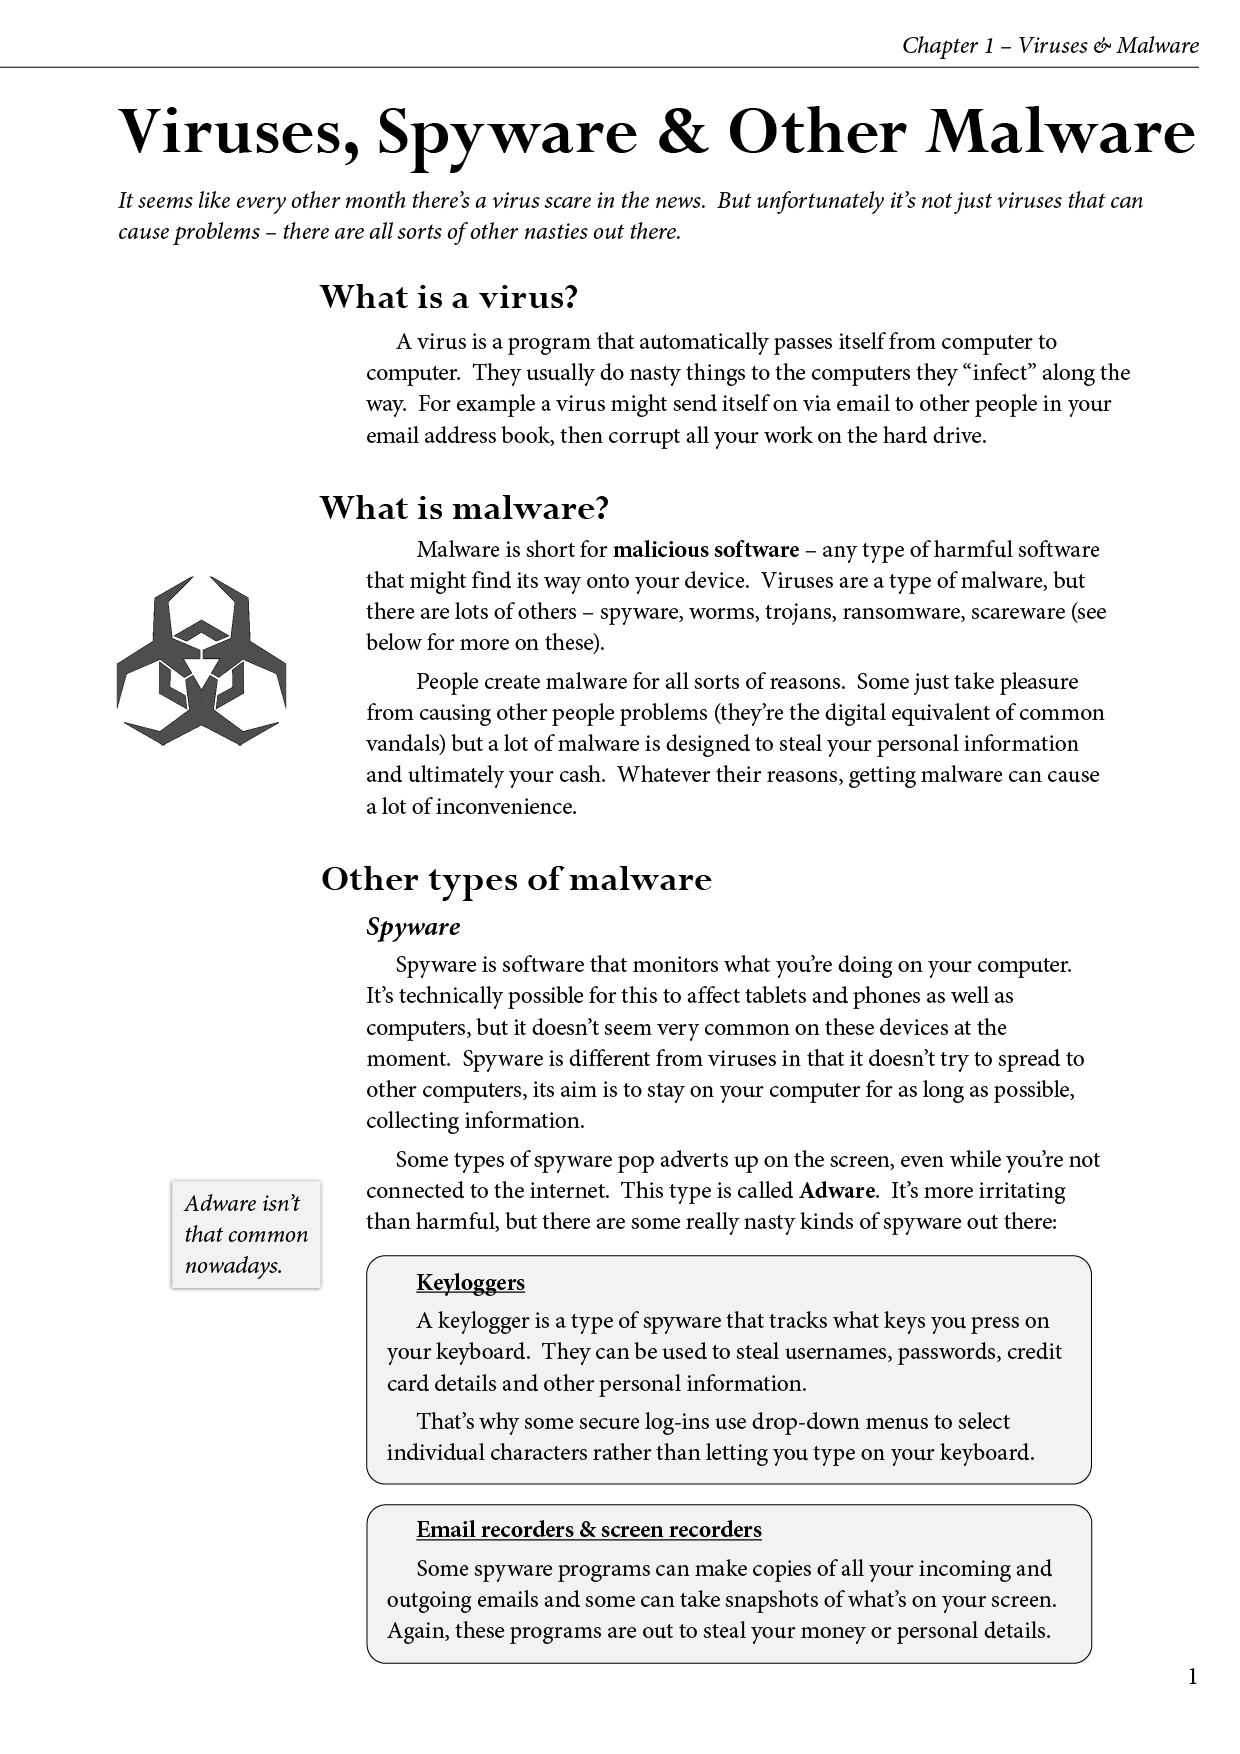 How to Stay Safe Online book sample page